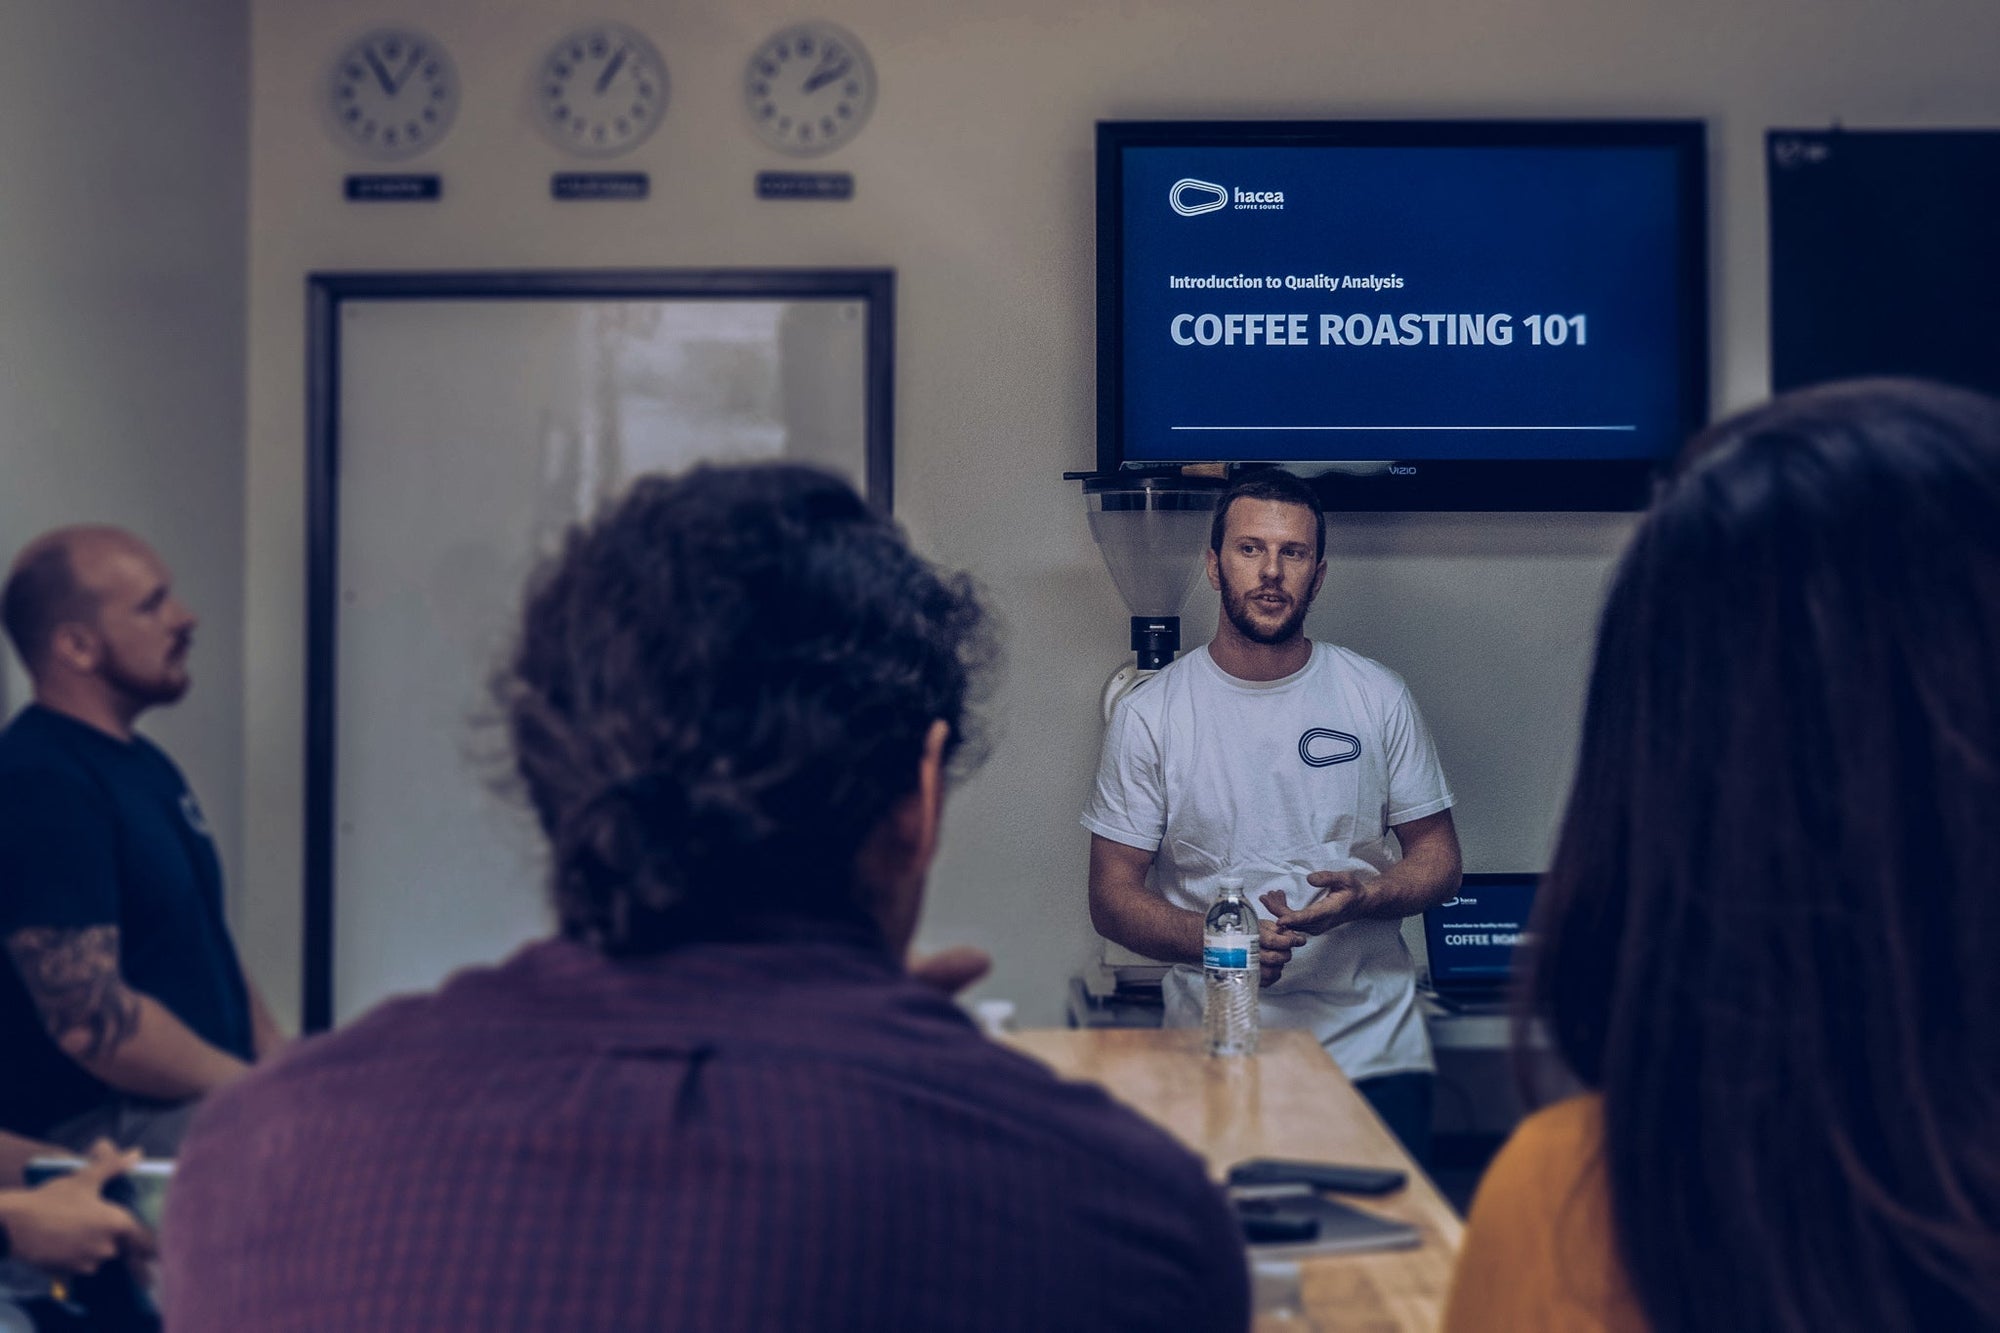 Coffee Roasting 101 - Introduction to Coffee Roasting - April 6th